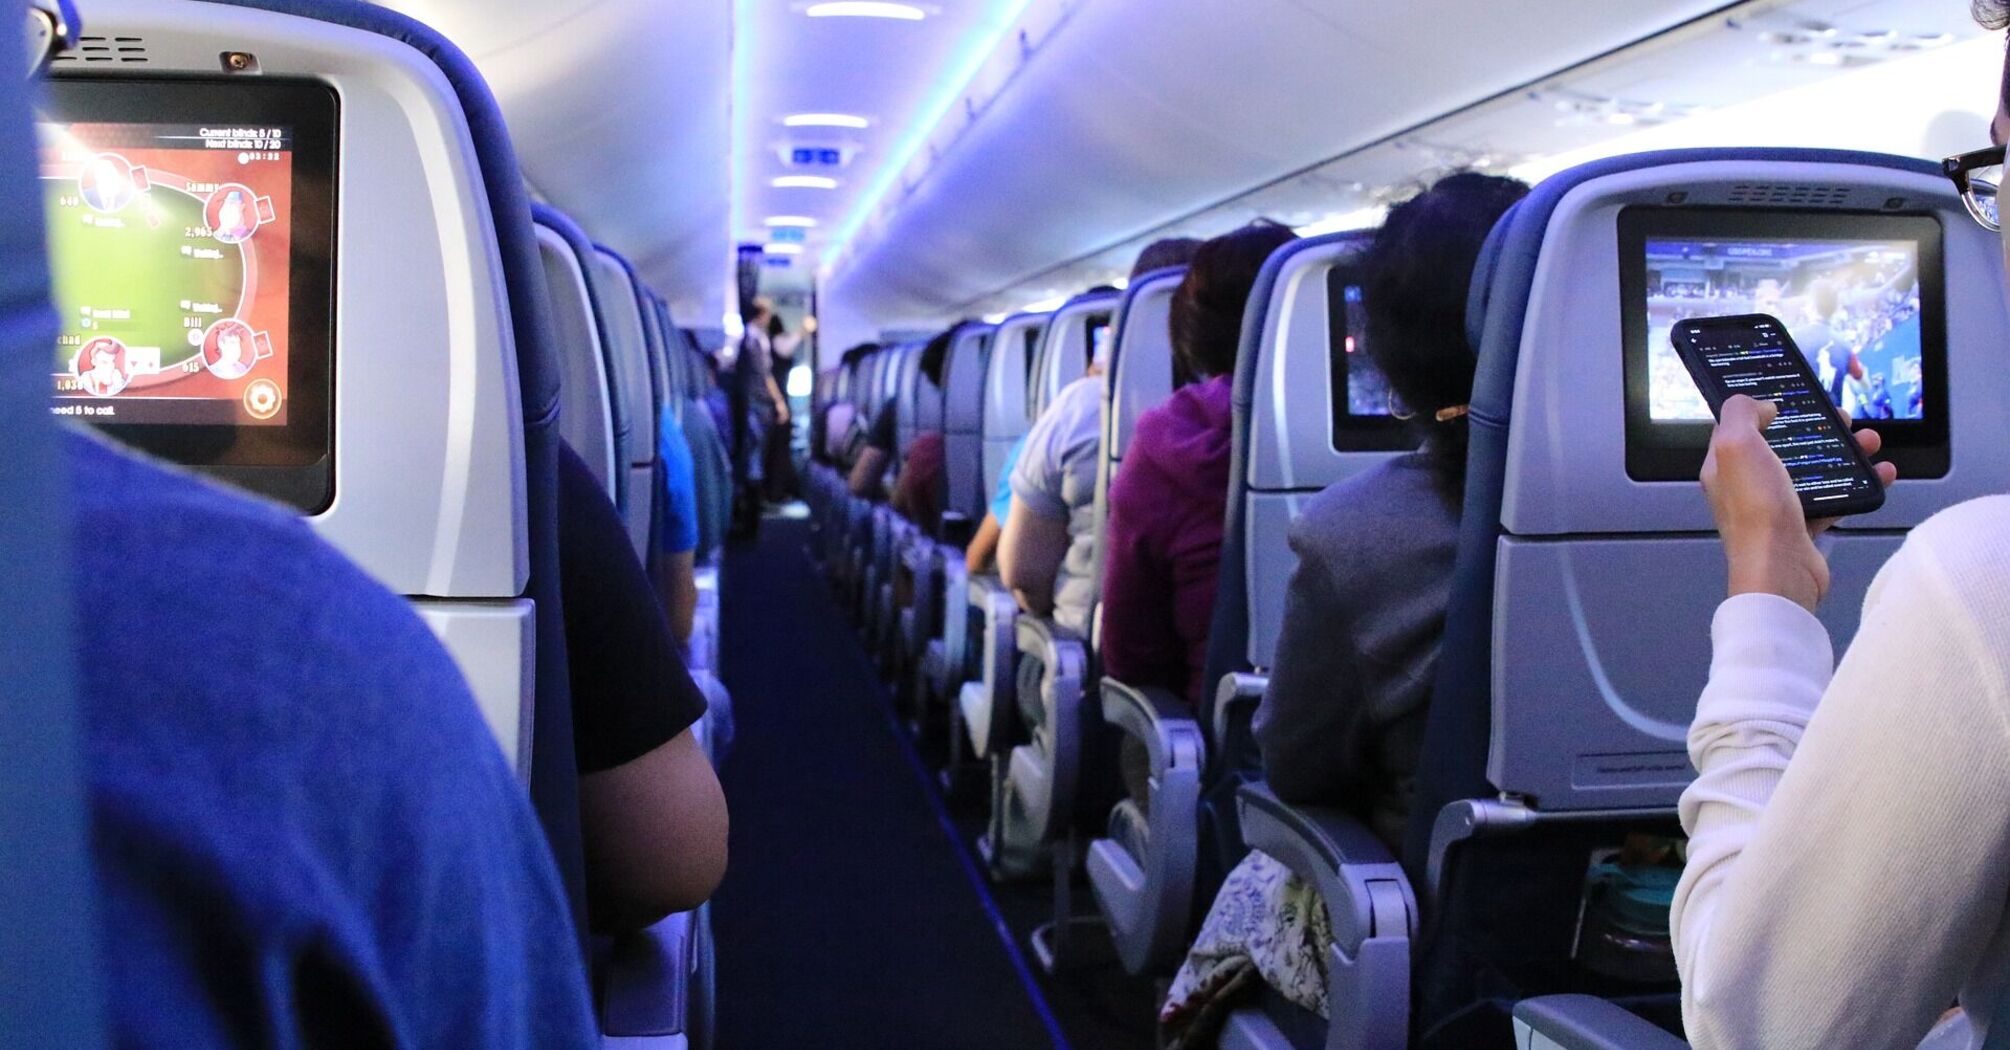 Passengers seated inside an airplane cabin